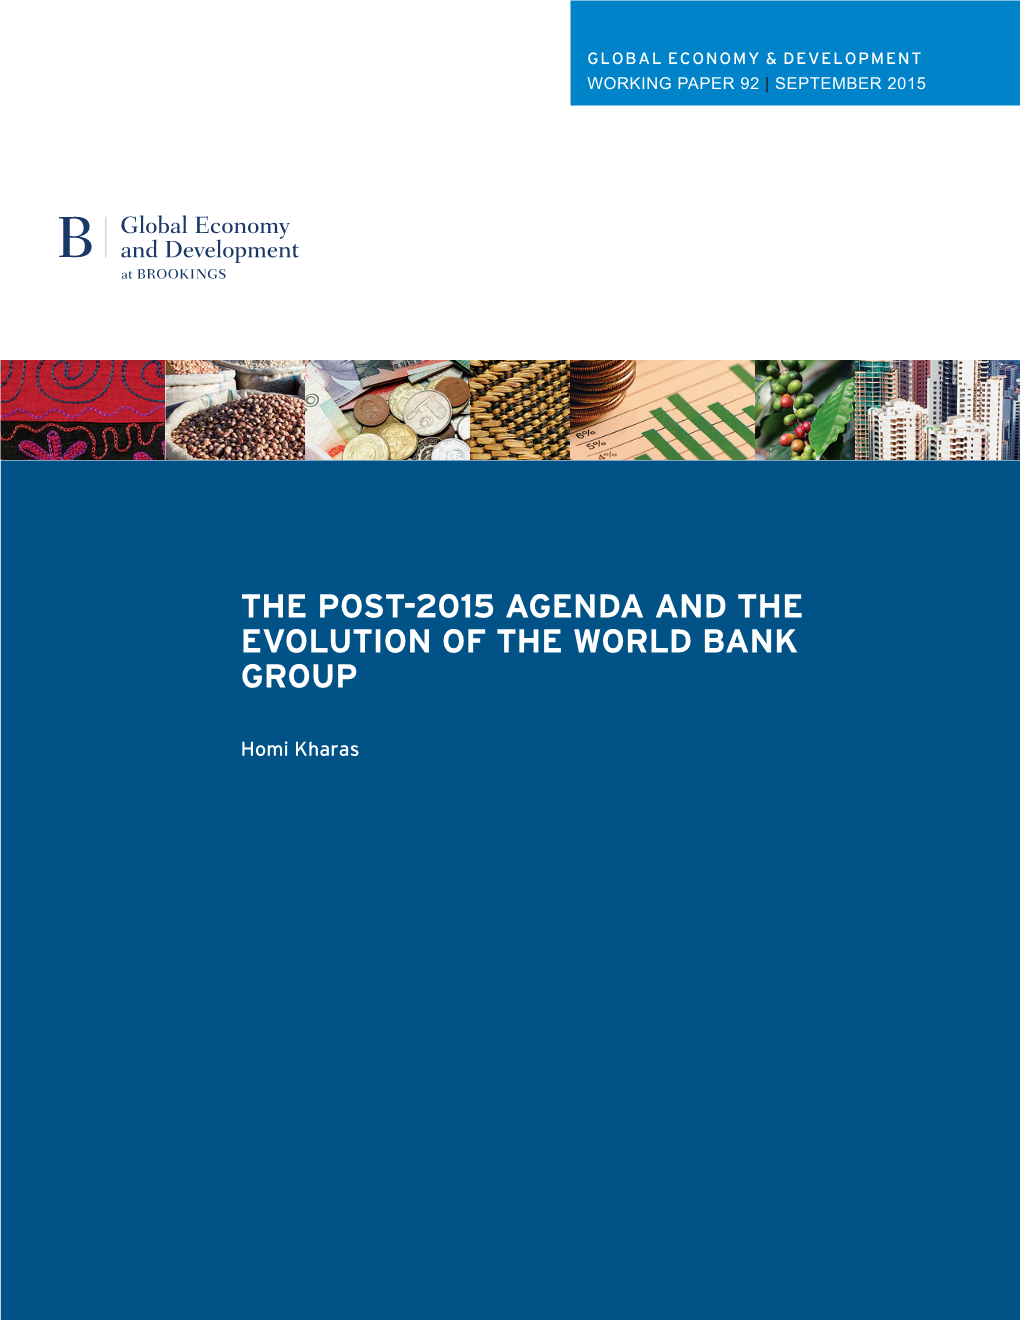 The Post-2015 Agenda and the Evolution of the World Bank Group